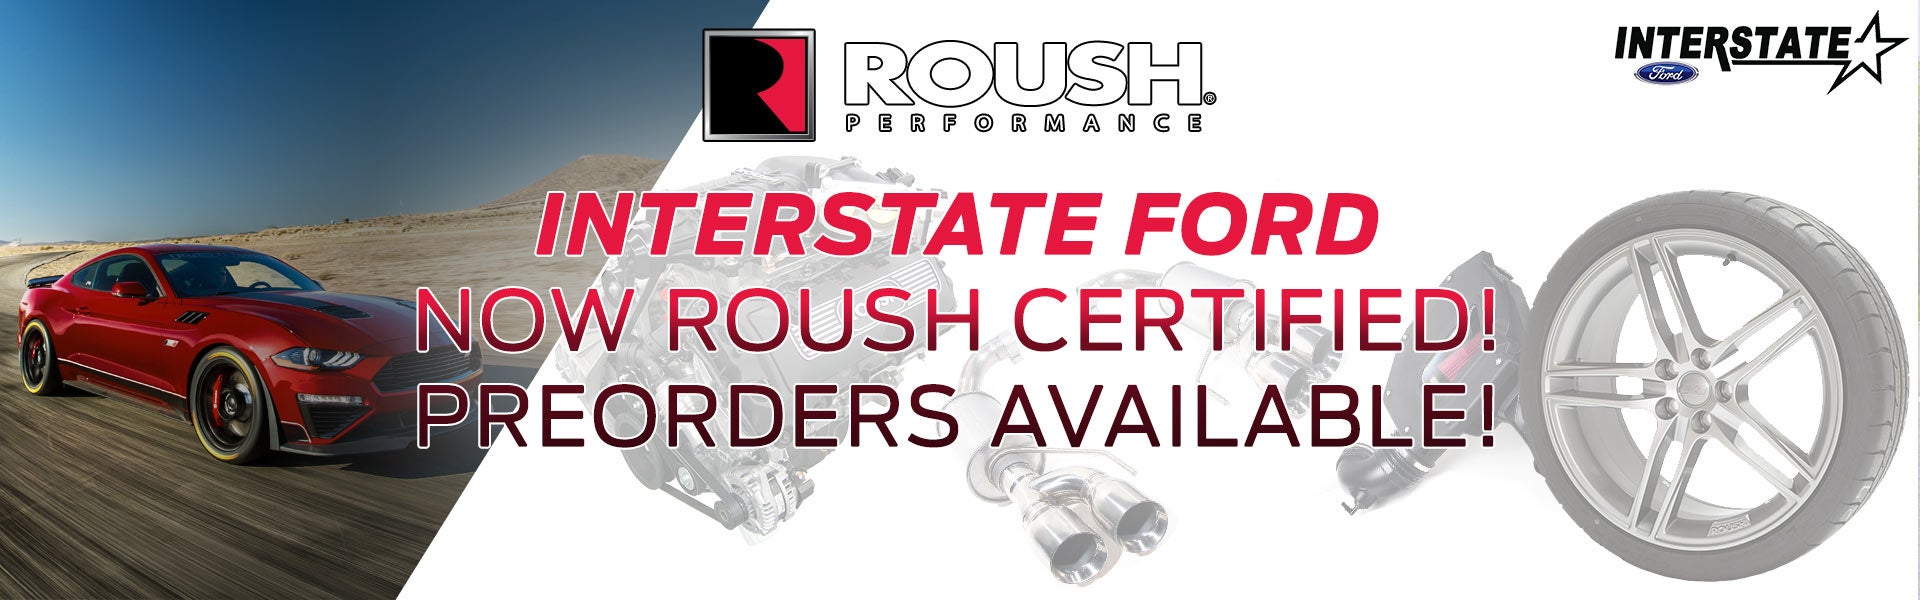 Interstate Ford now Roush certified! Preorders available!